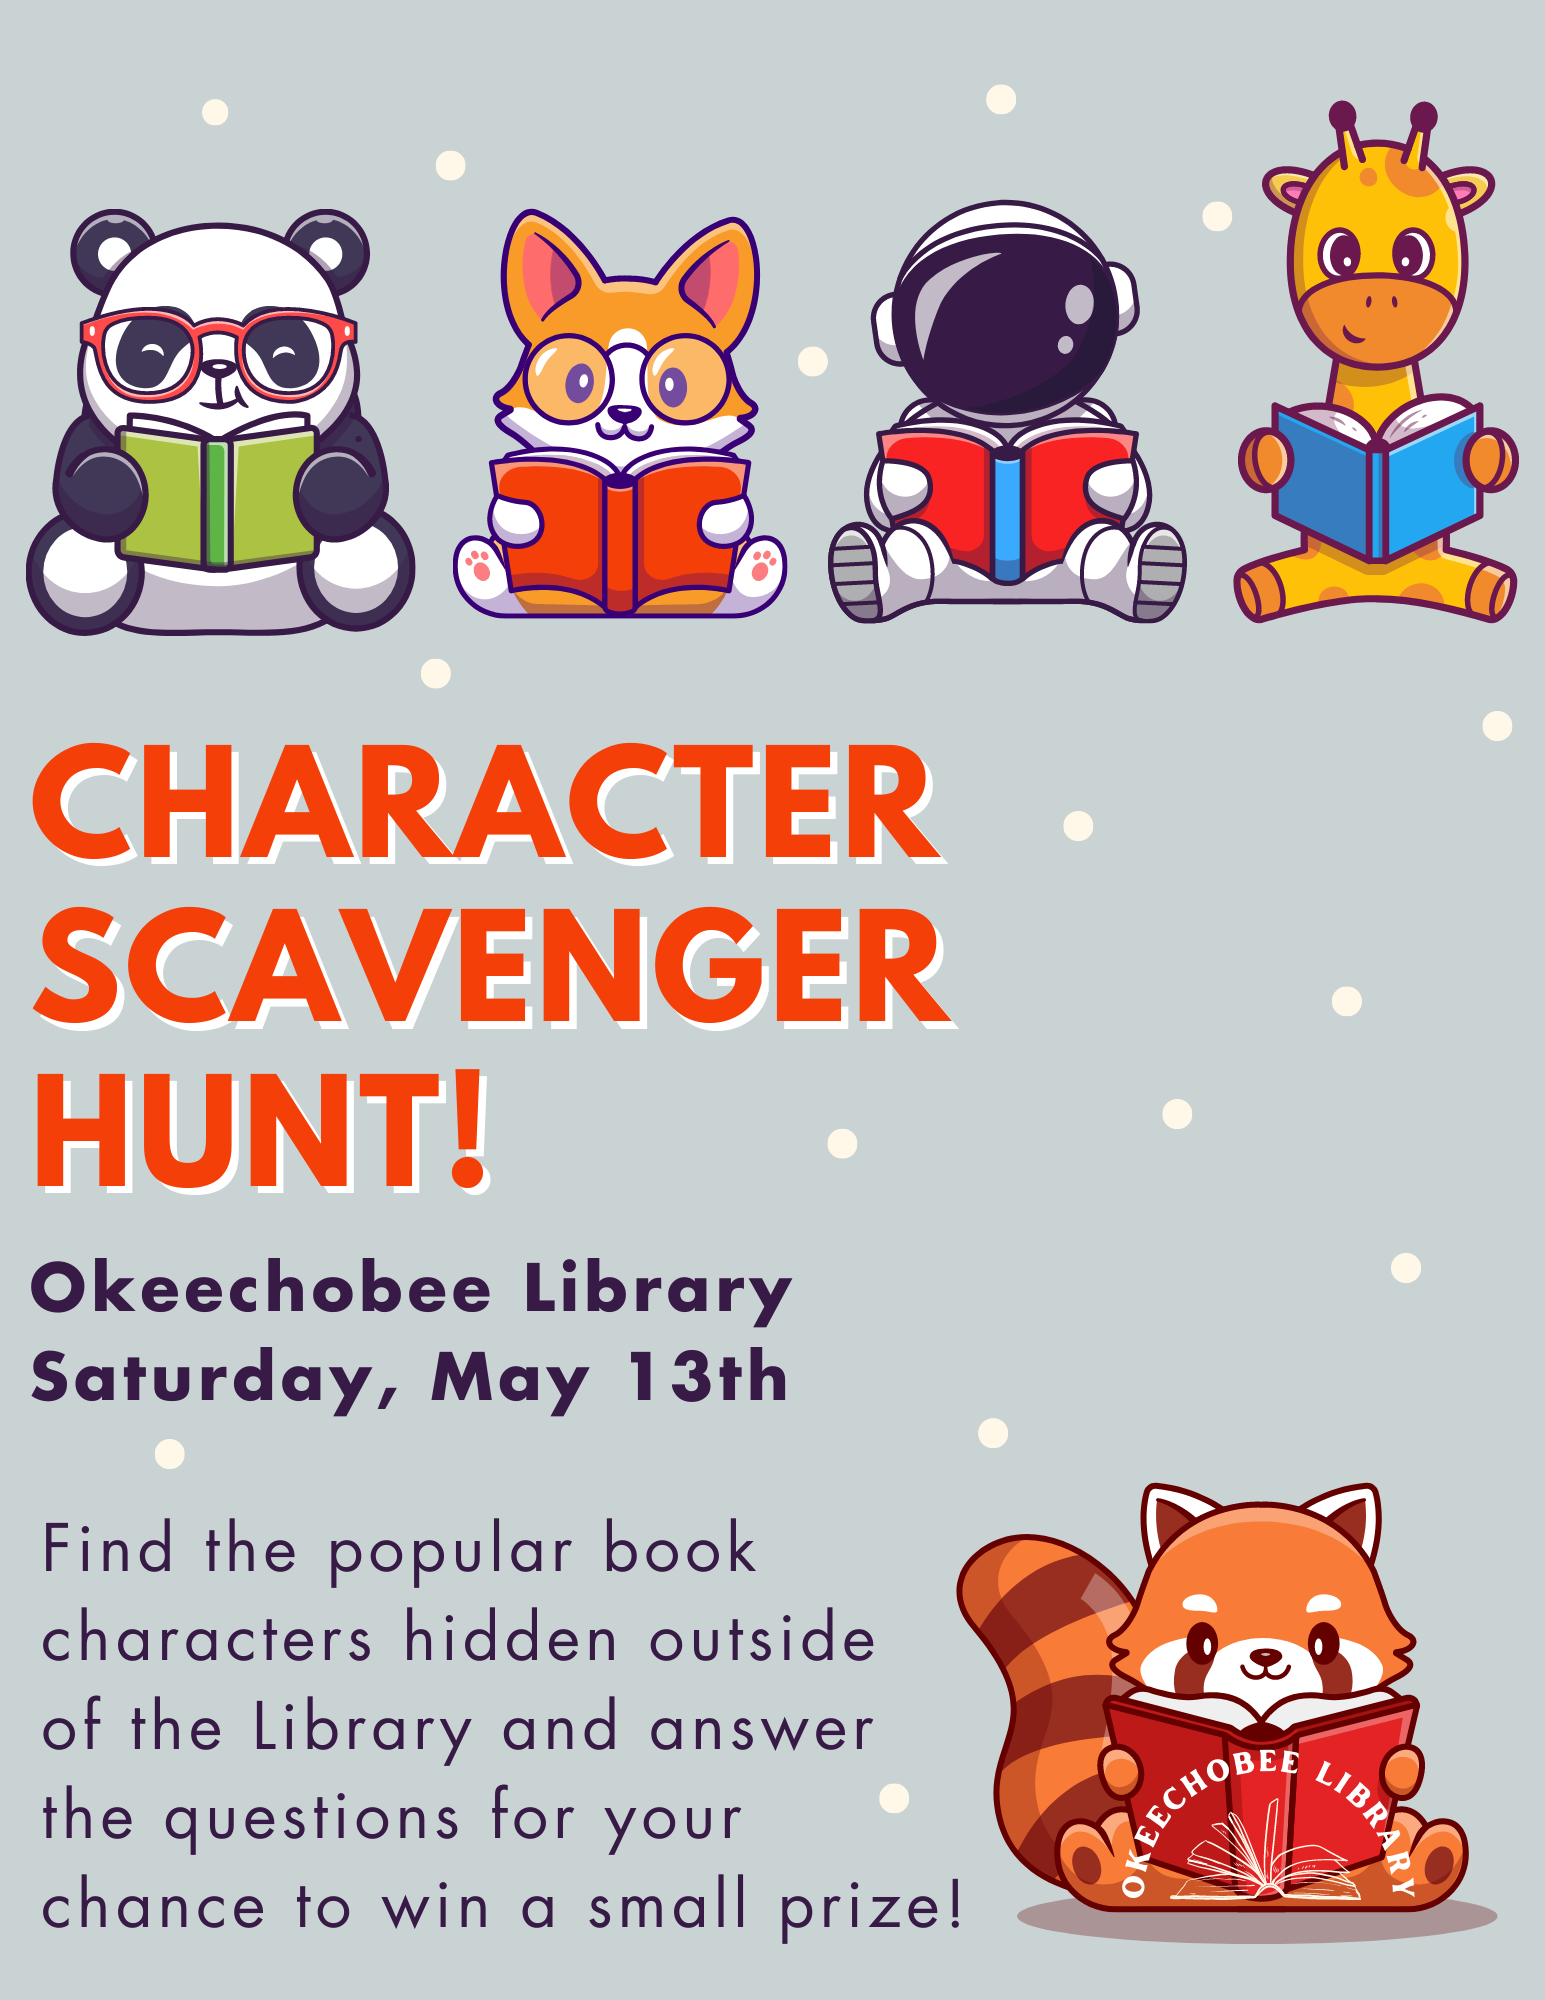 Come by the Okeechobee Library Saturday, May 13th all day long to participate in our Book Character Scavenger Hunt!